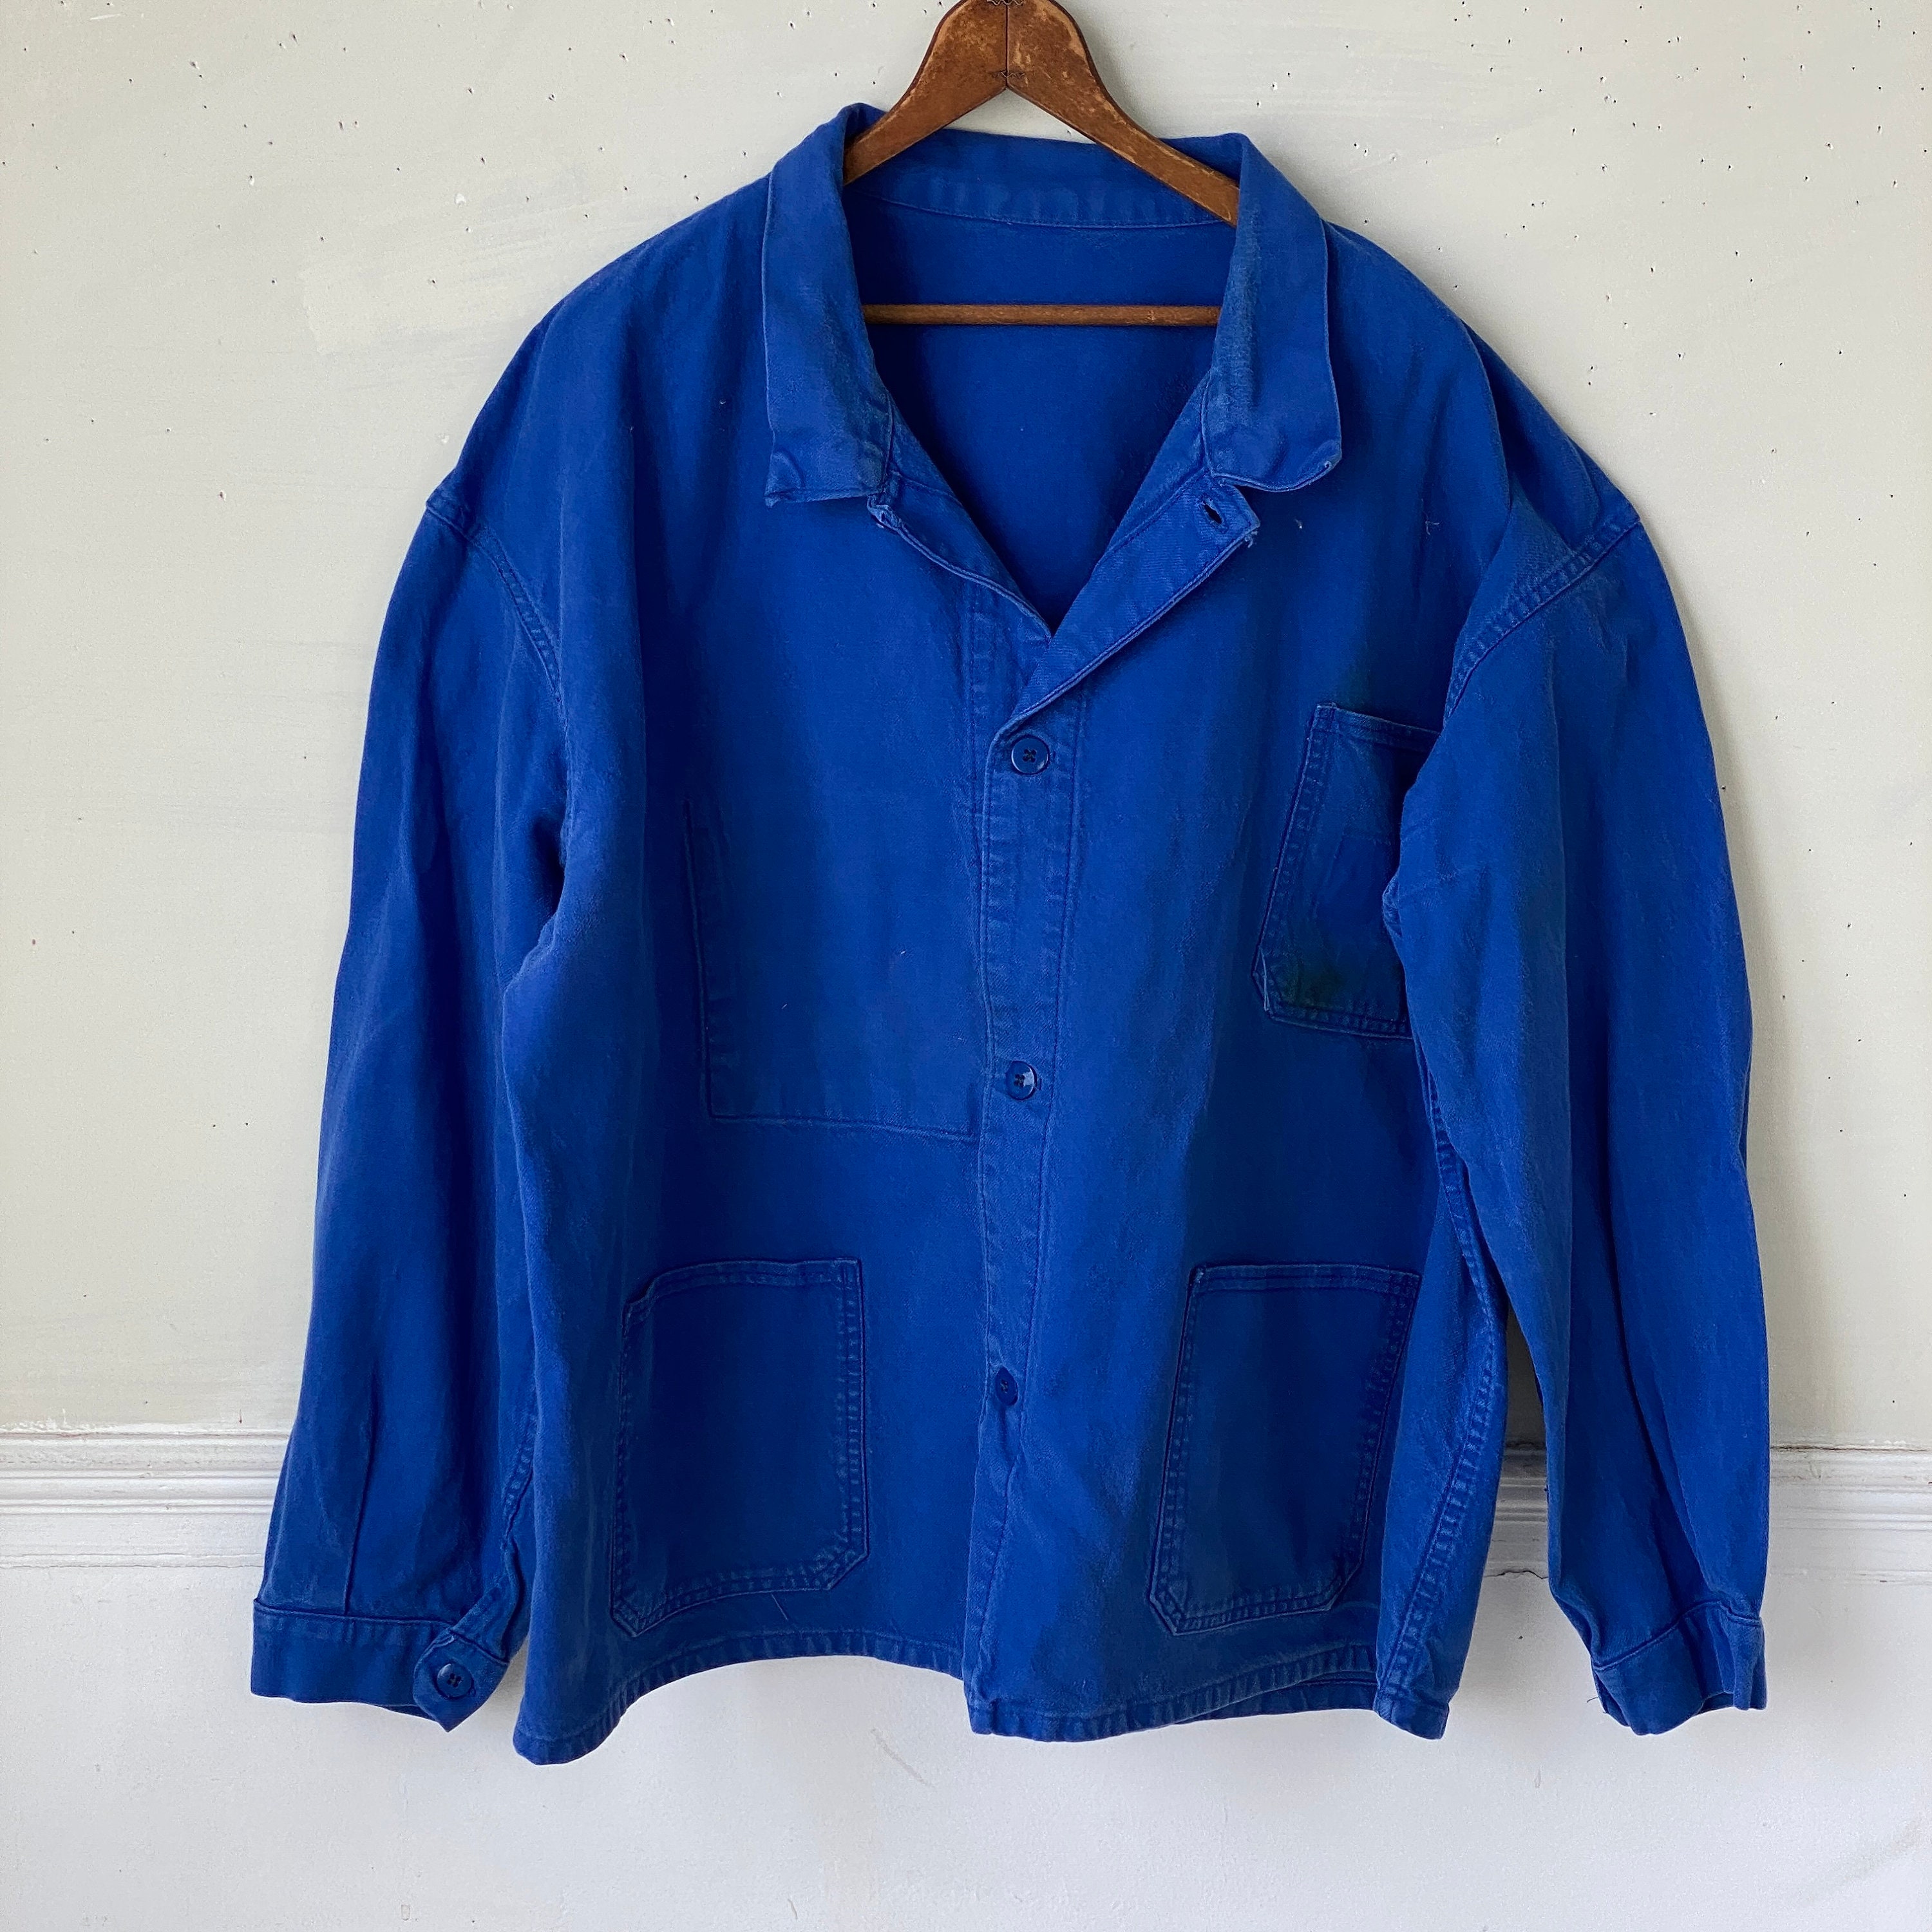 Real Vintage Search Engine Vintage Jacket French Workwear Shirt Weight 1940S-1950S Historical Costuming The Textile Trunk $150.00 AT vintagedancer.com